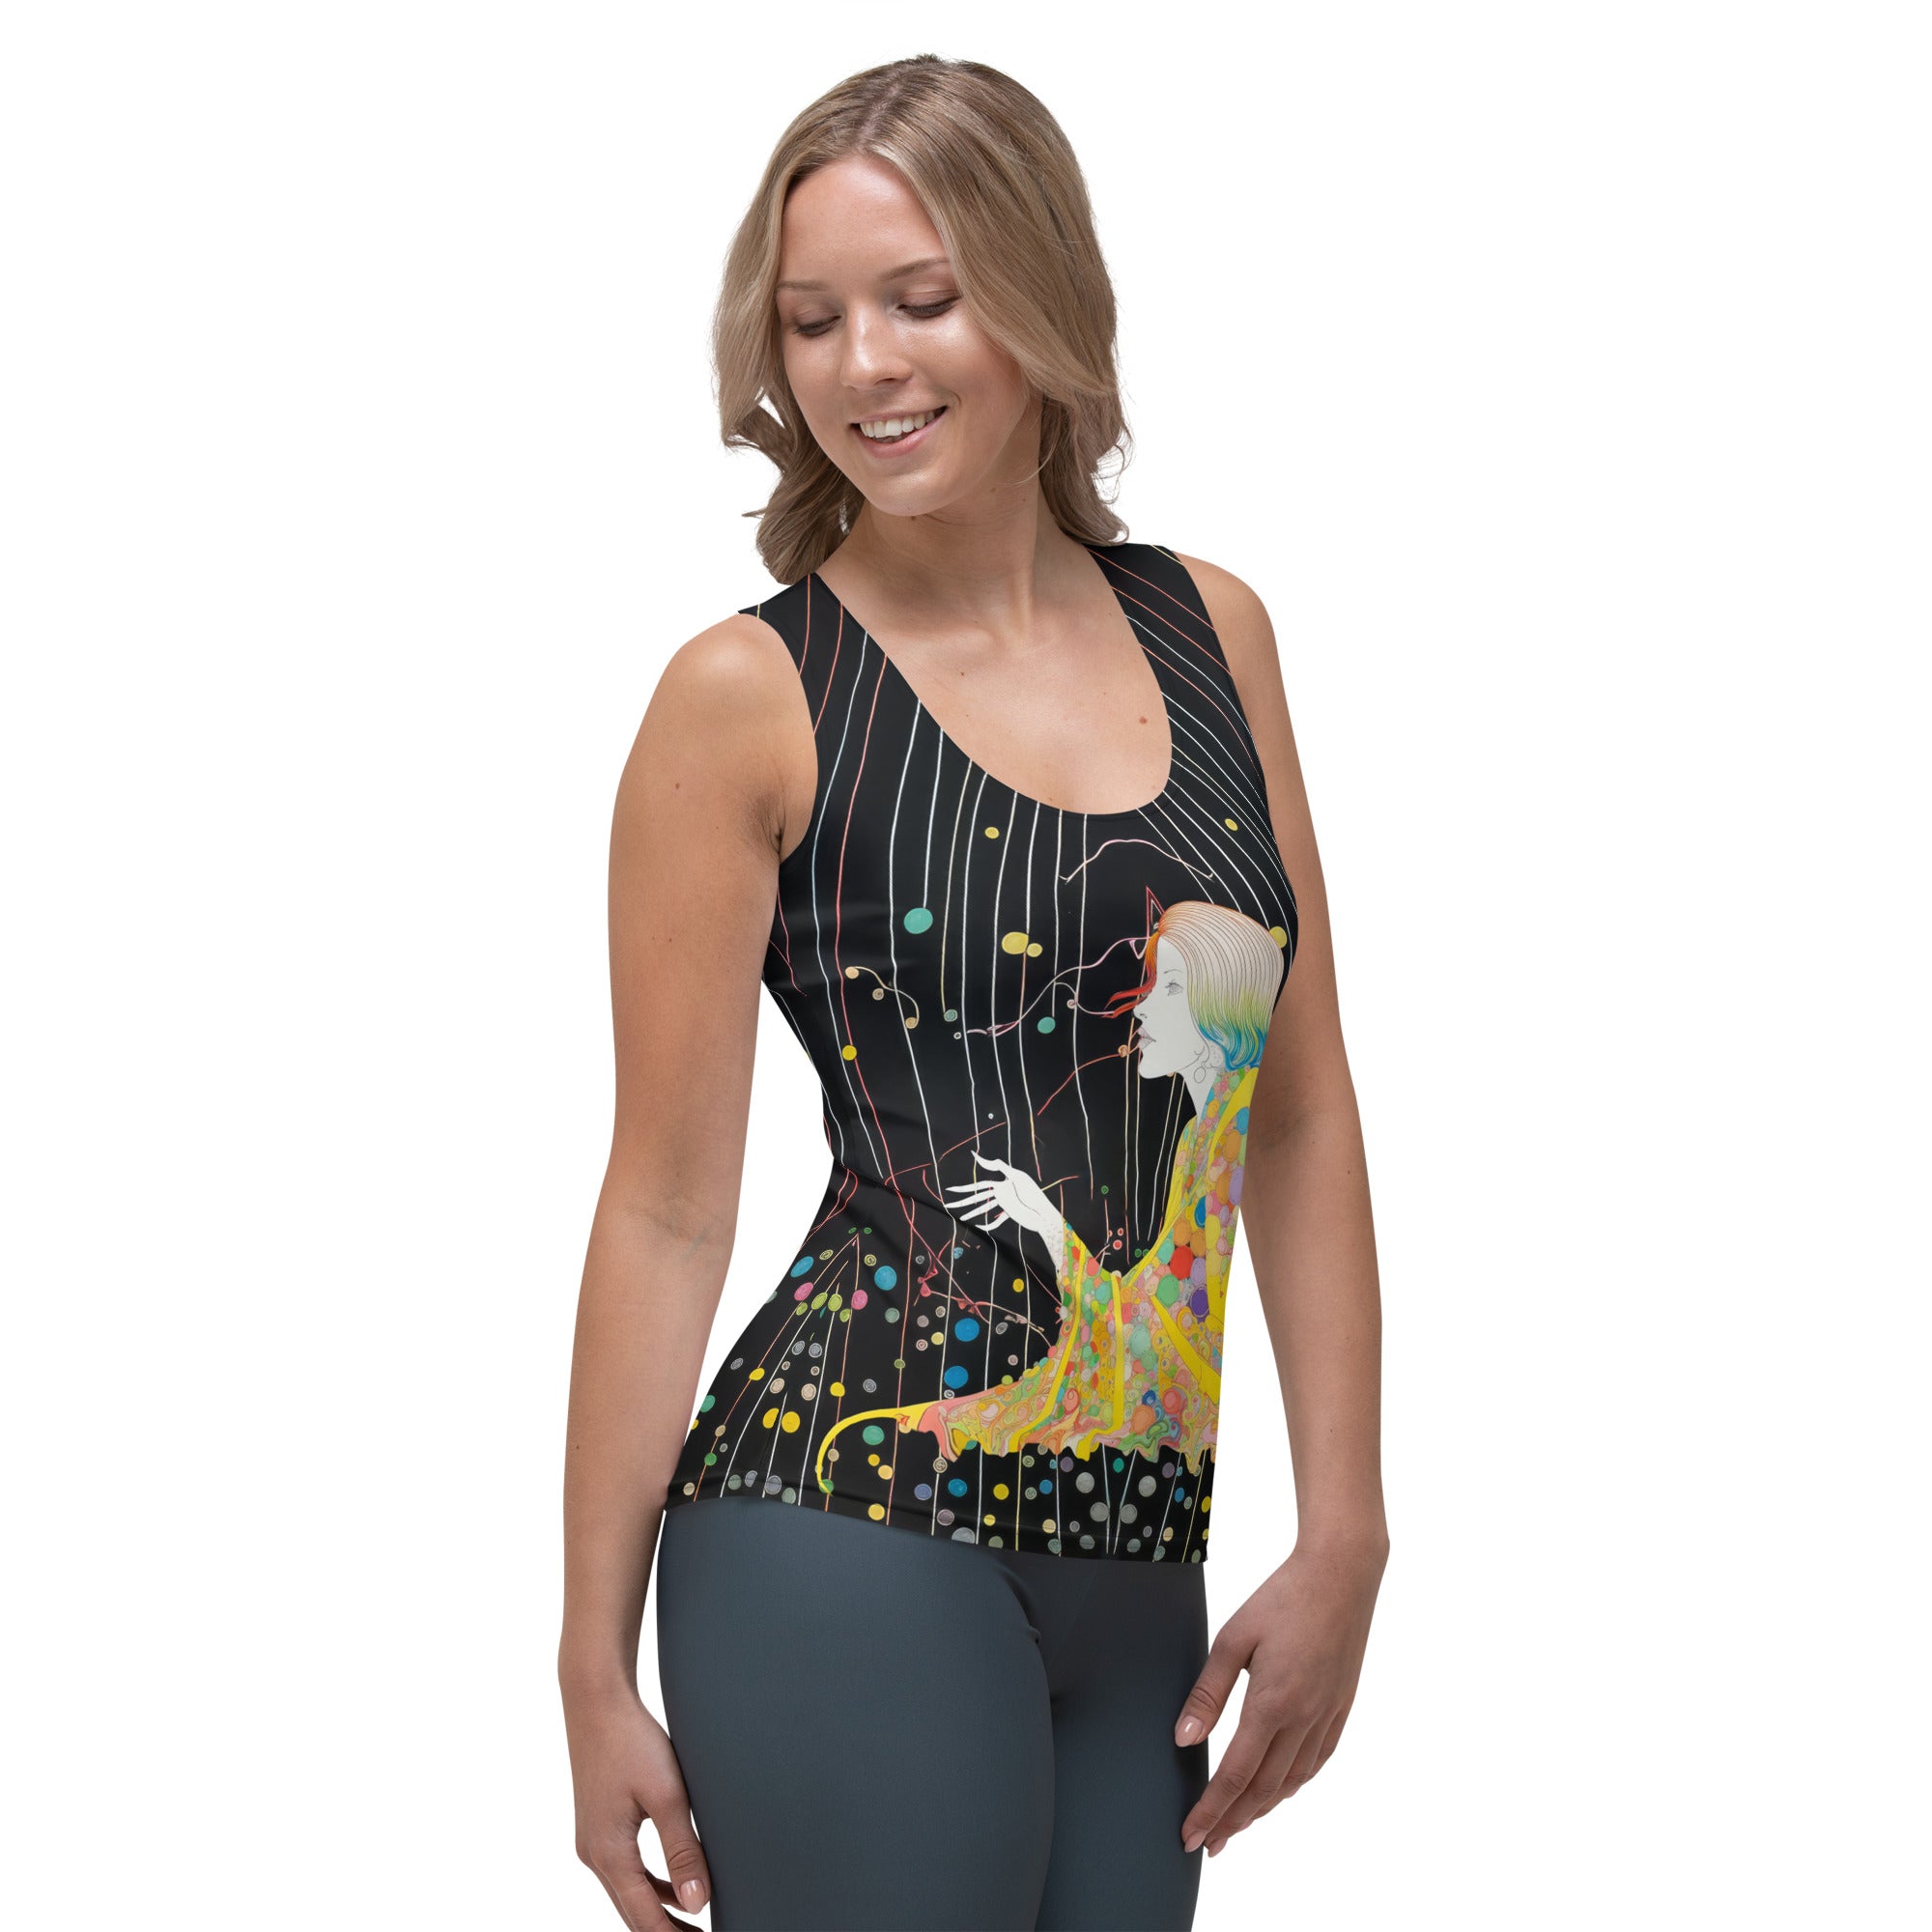 Bohemian Blossoms Women's Tank Top displayed on a clothing rack.